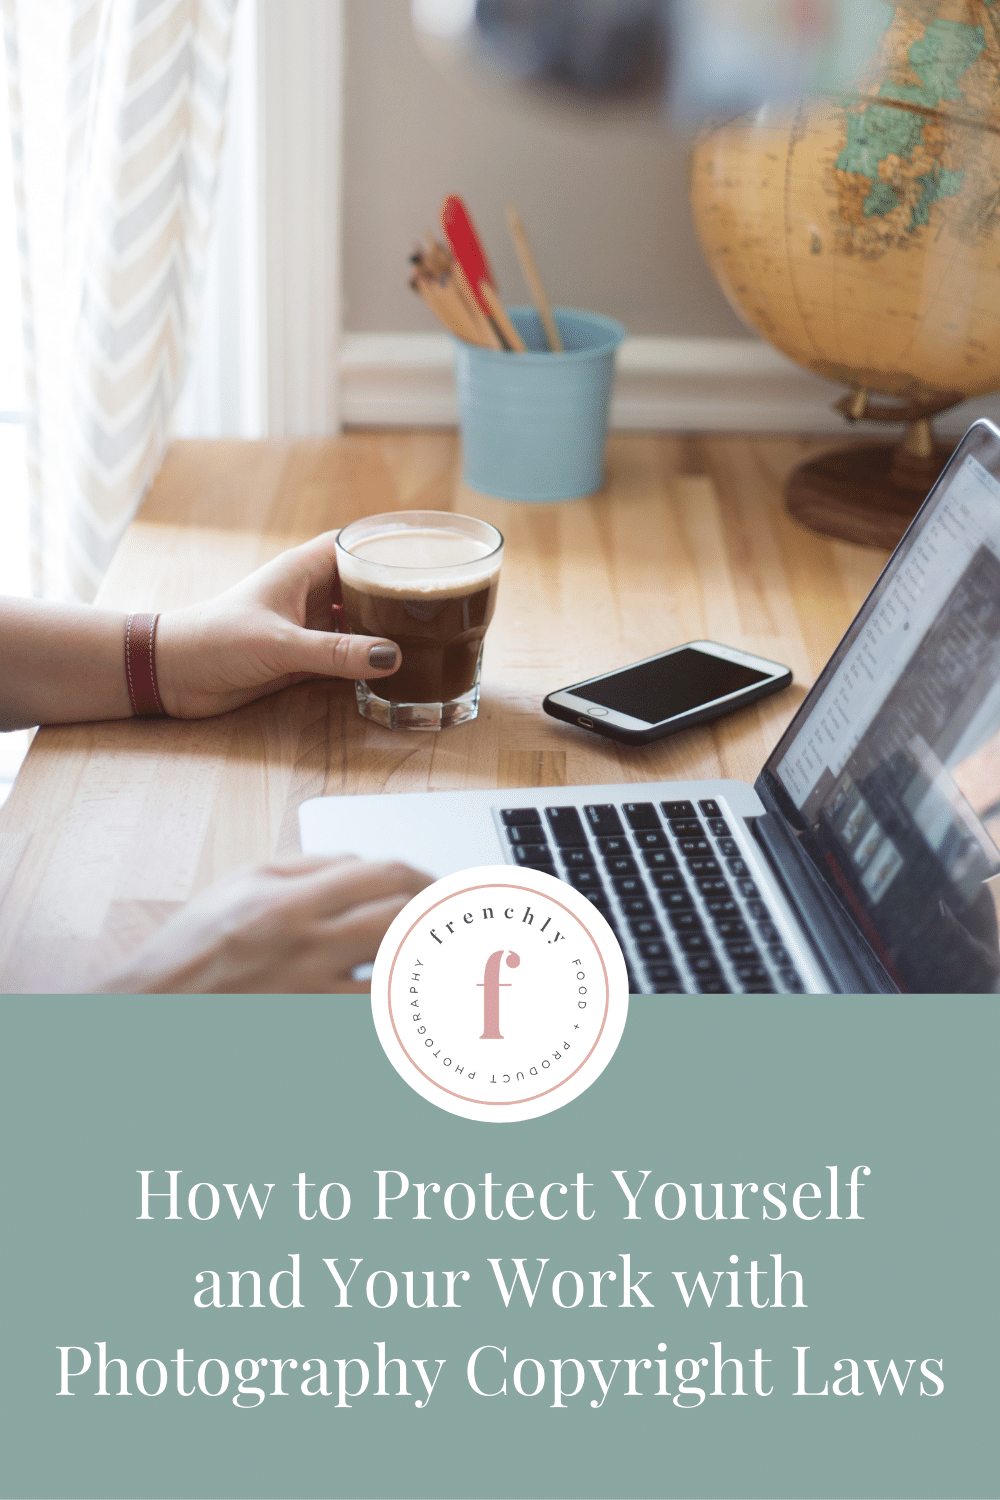 How to Protect Yourself and Your Work with Photography Copyright Laws | Frenchly Food + Product Photography